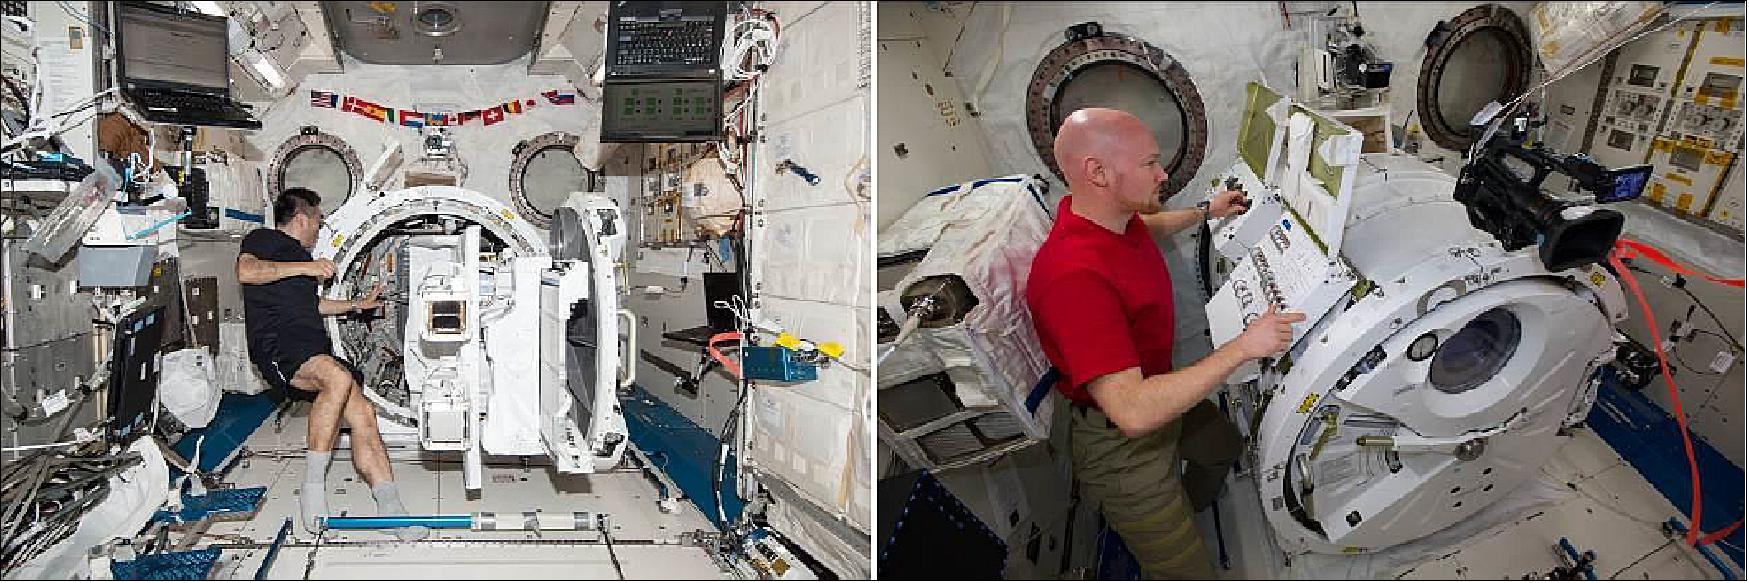 Figure 26: J-SSOD Checkout and Setup for Deployment. Left: Checkout of the J-SSOD system by an Astronaut; Right: Airlock operation by an Astronaut (image credit JAXA/NASA).